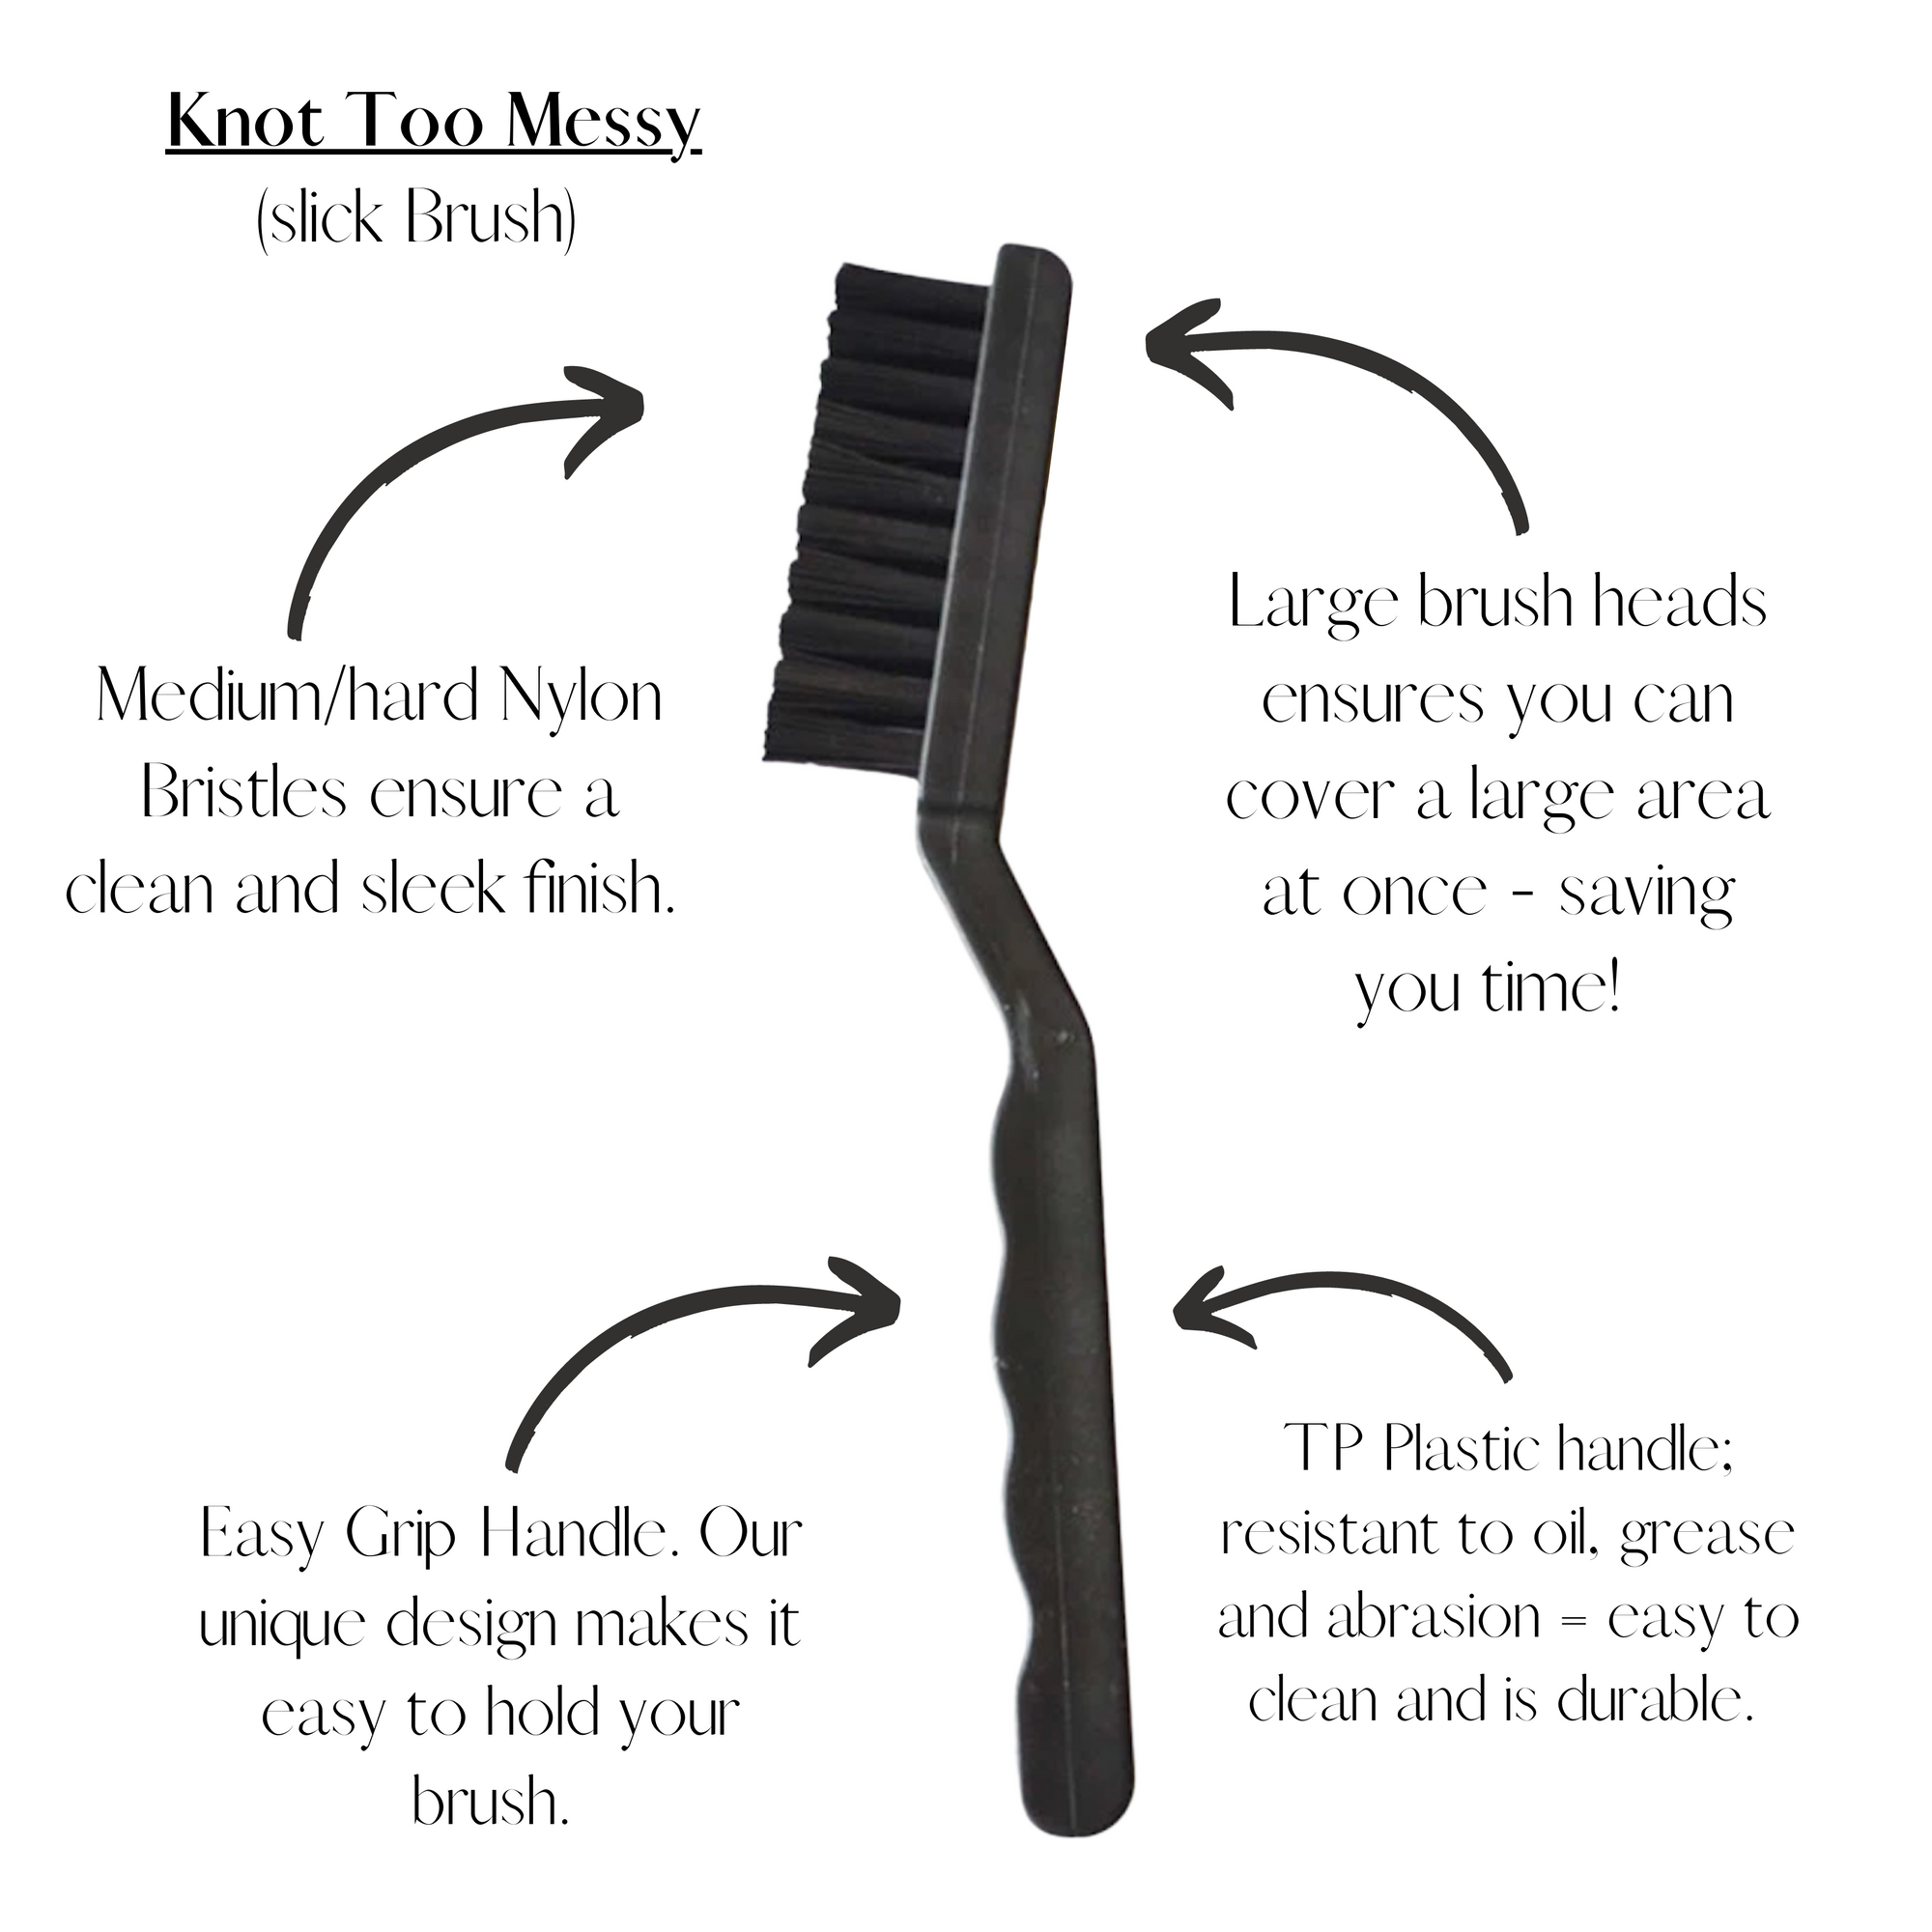 The Knot Too Messy - Brosse lisse